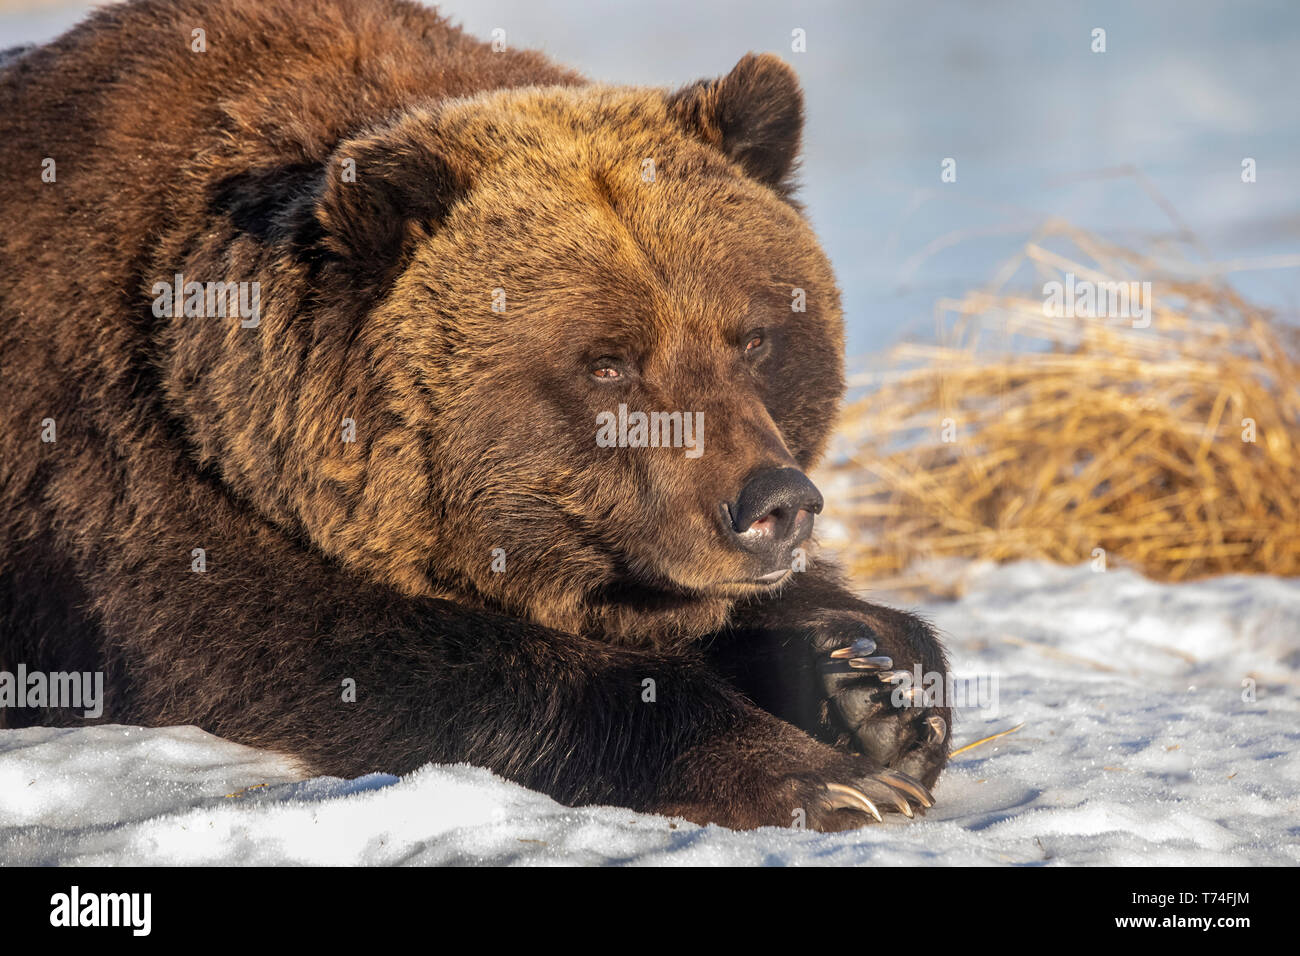 Captive female Grizzly bear (Ursus arctos horribilis),  approximately 19 years old, resting in the snow, Alaska, Wildlife Conservation Center, Sout... Stock Photo